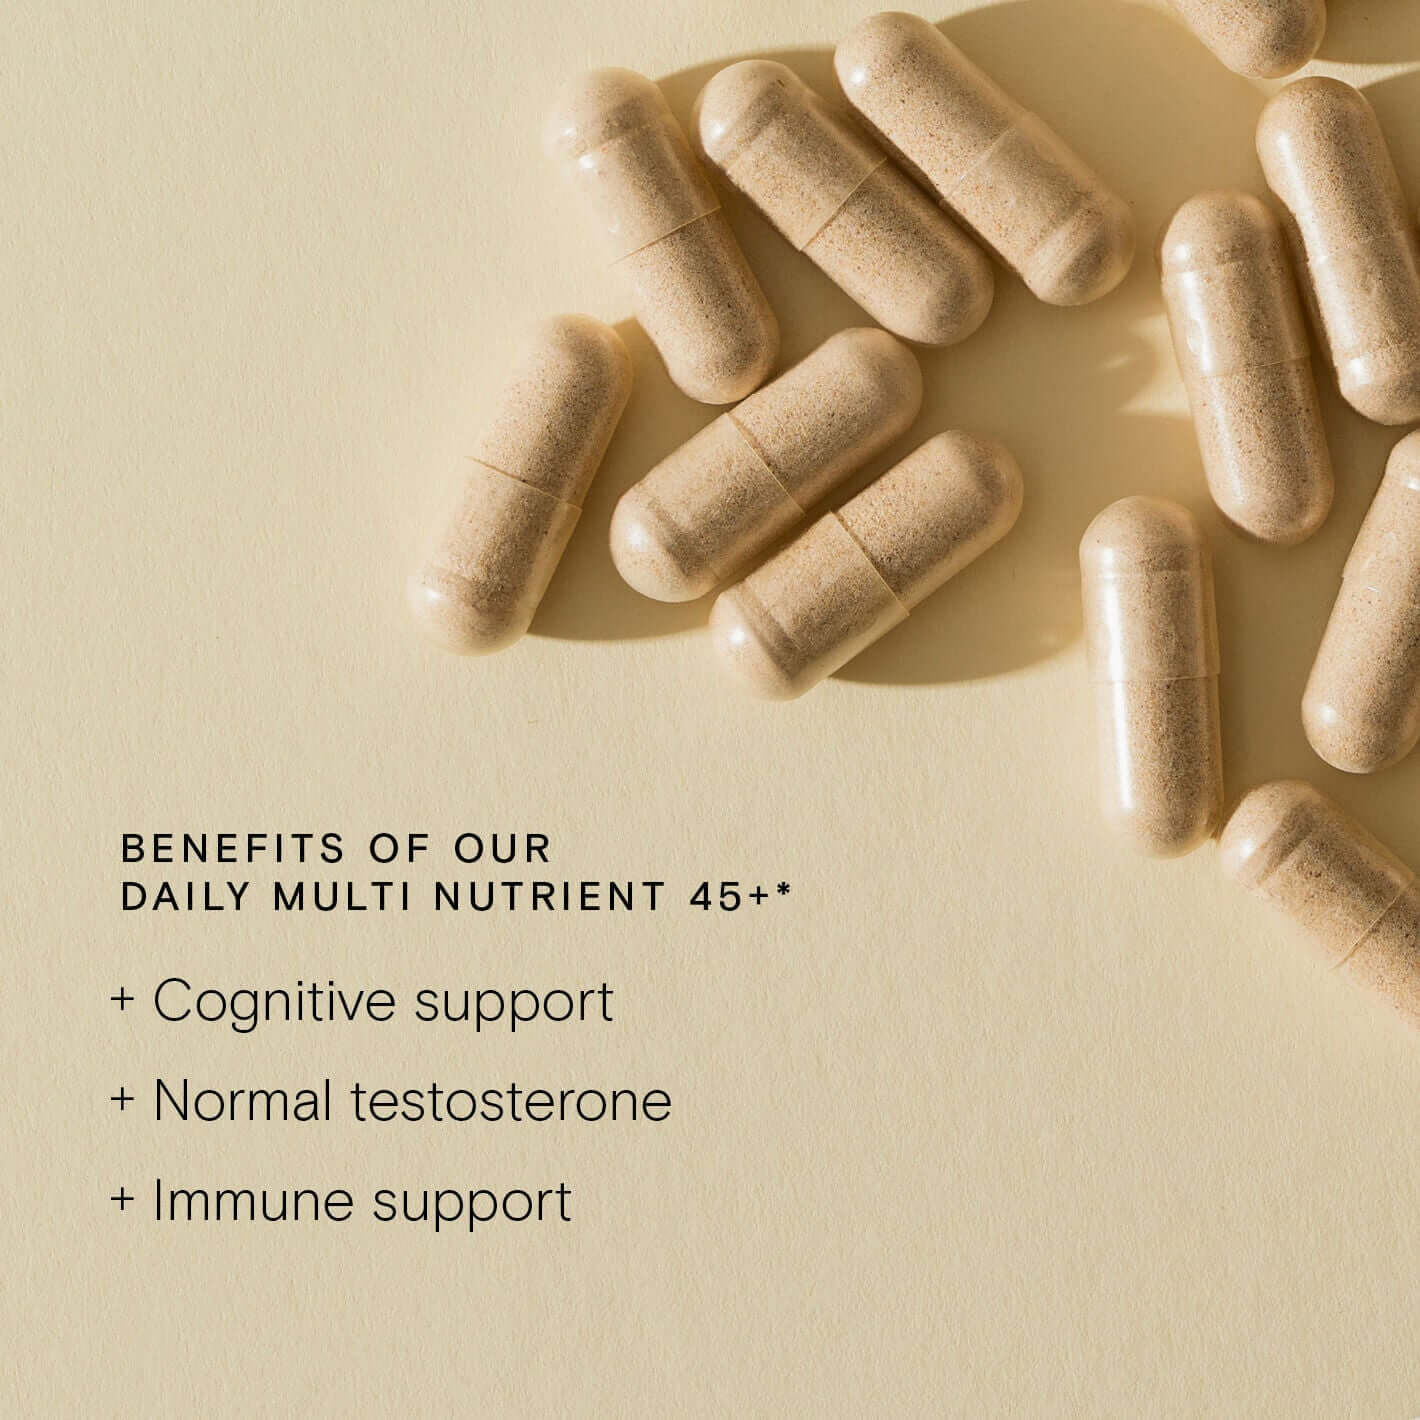 Food-Grown® Daily Multi Nutrient 45+ for Men